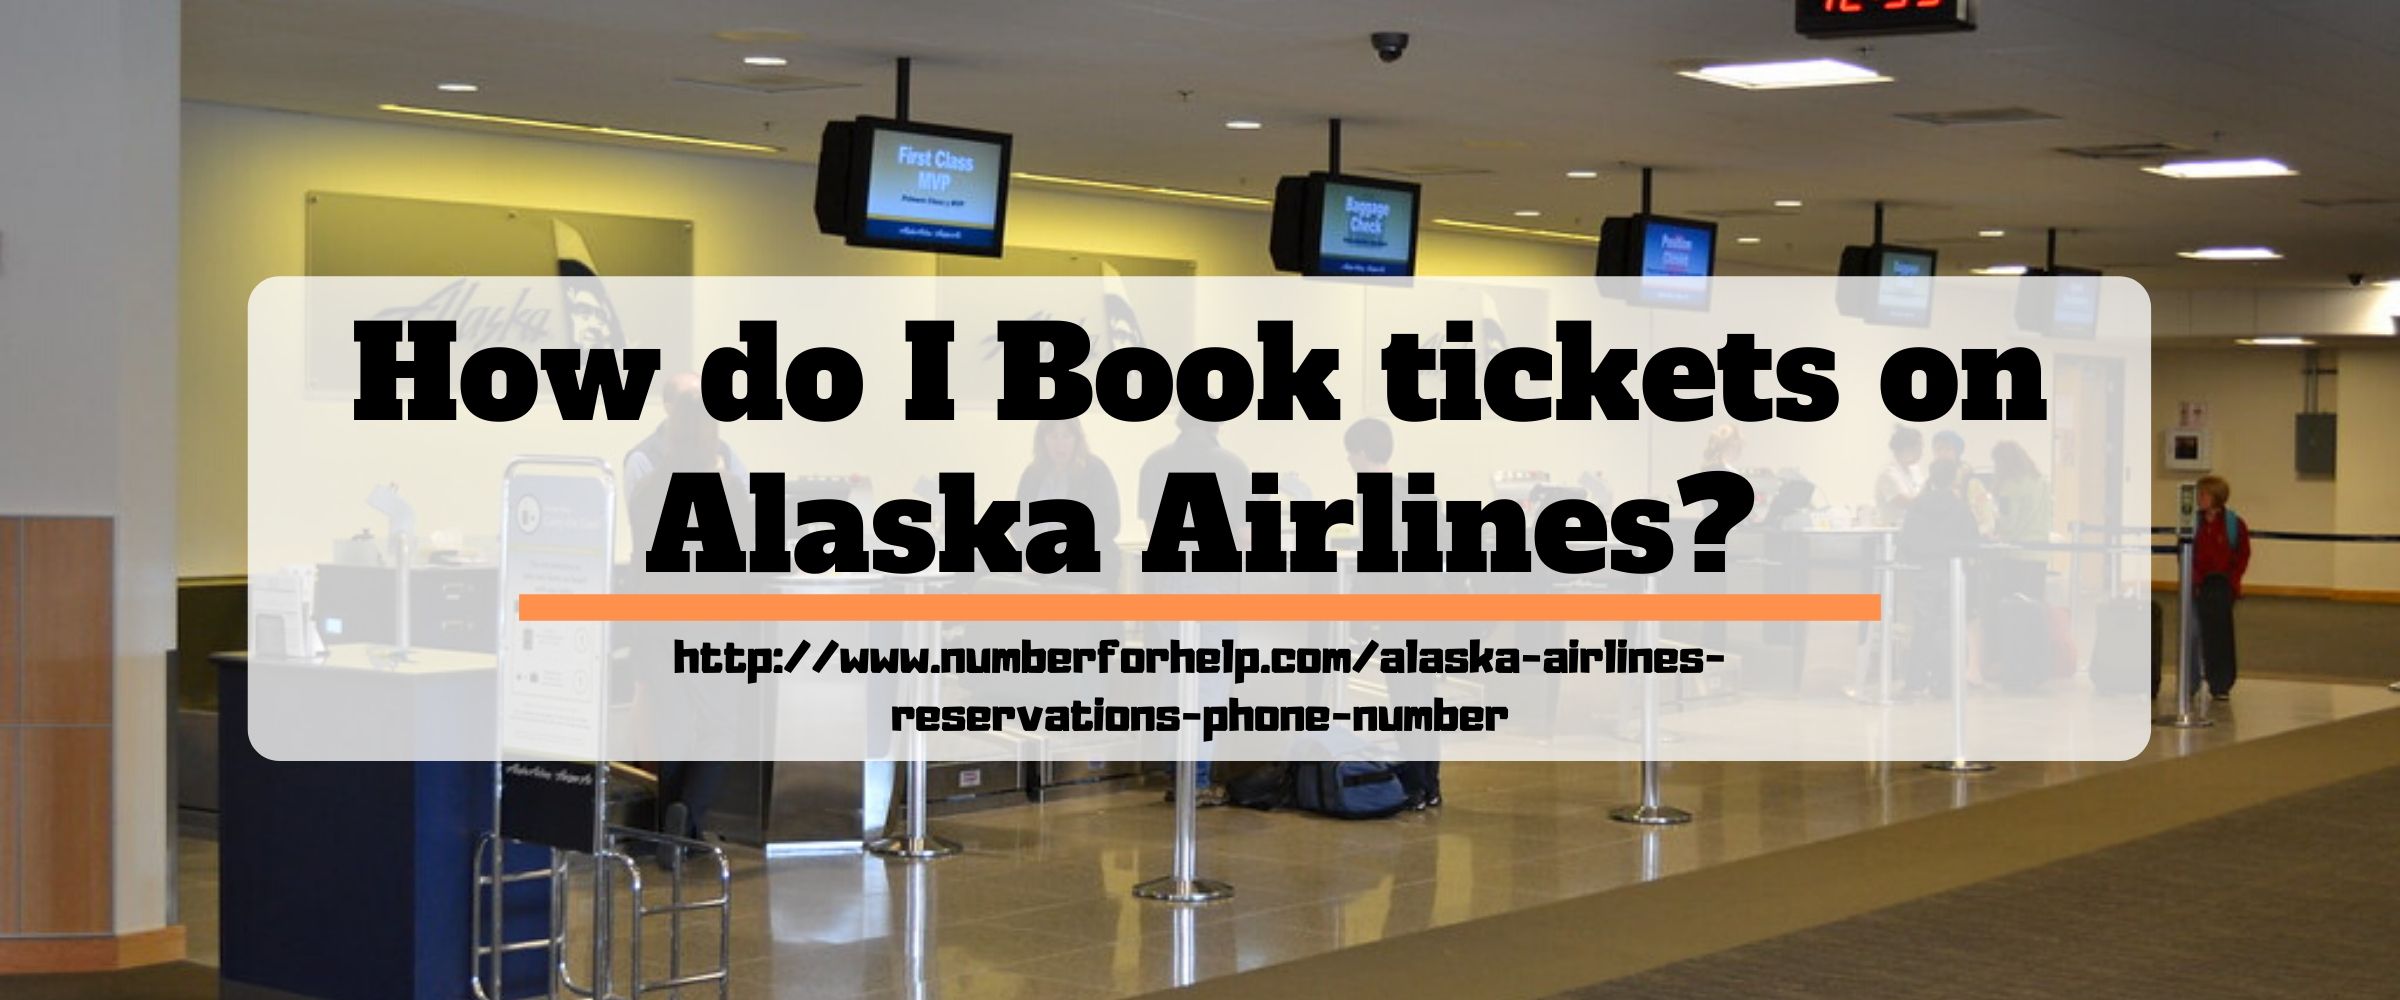 2019-11-14-11-02-19How do I Book tickets on Alaska Airlines_-min